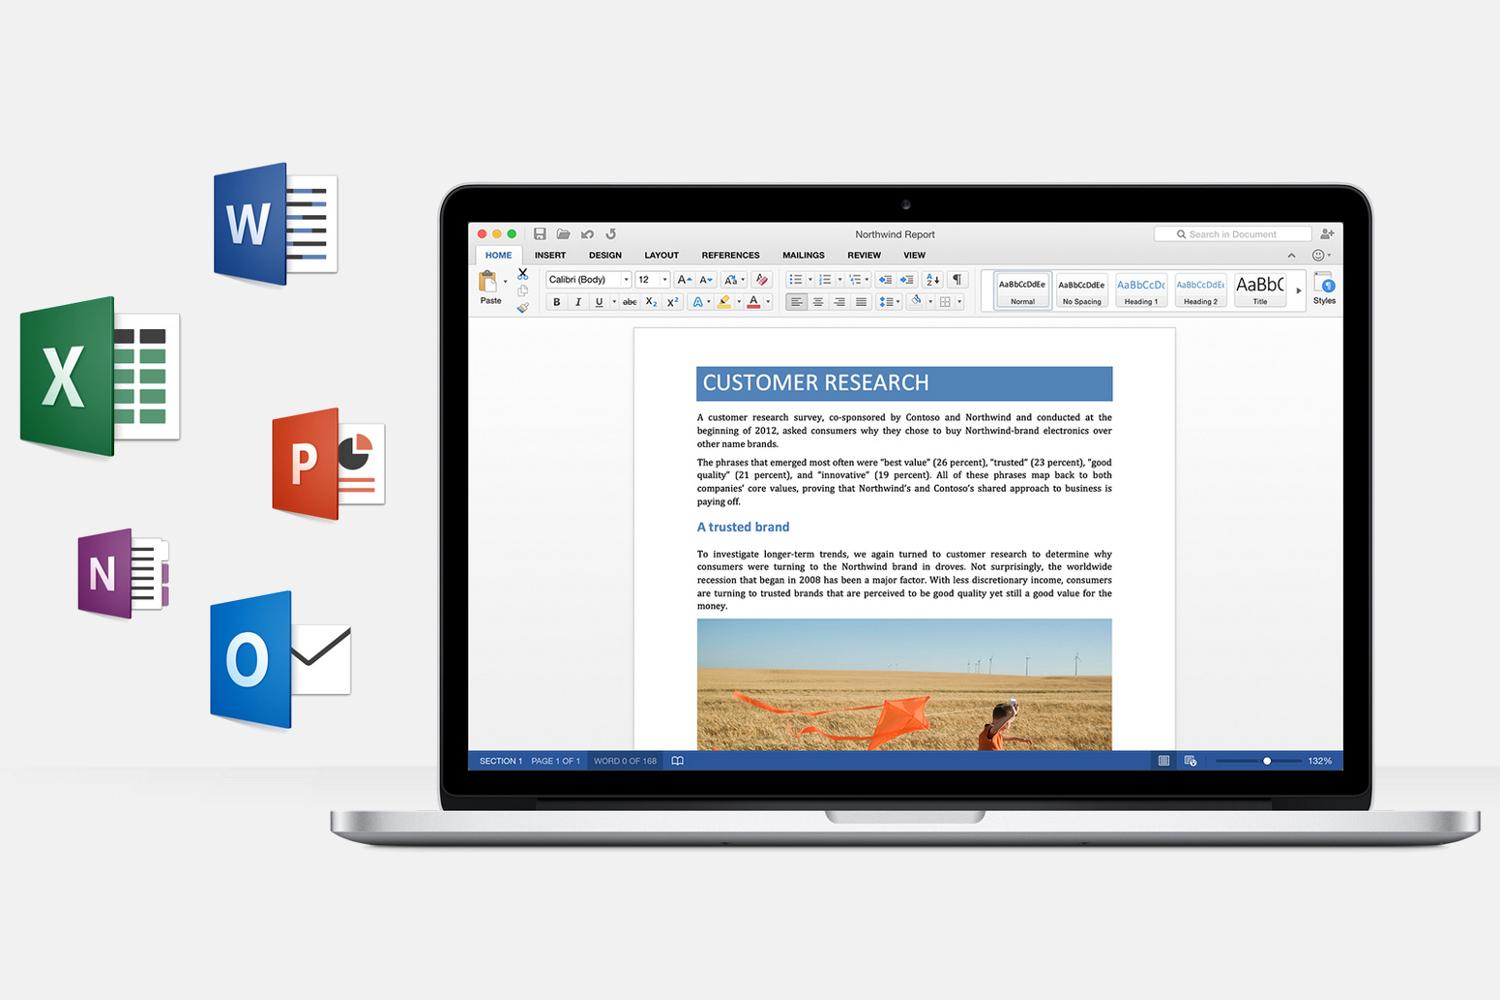 Microsoft Office 2016 (for Mac) Review